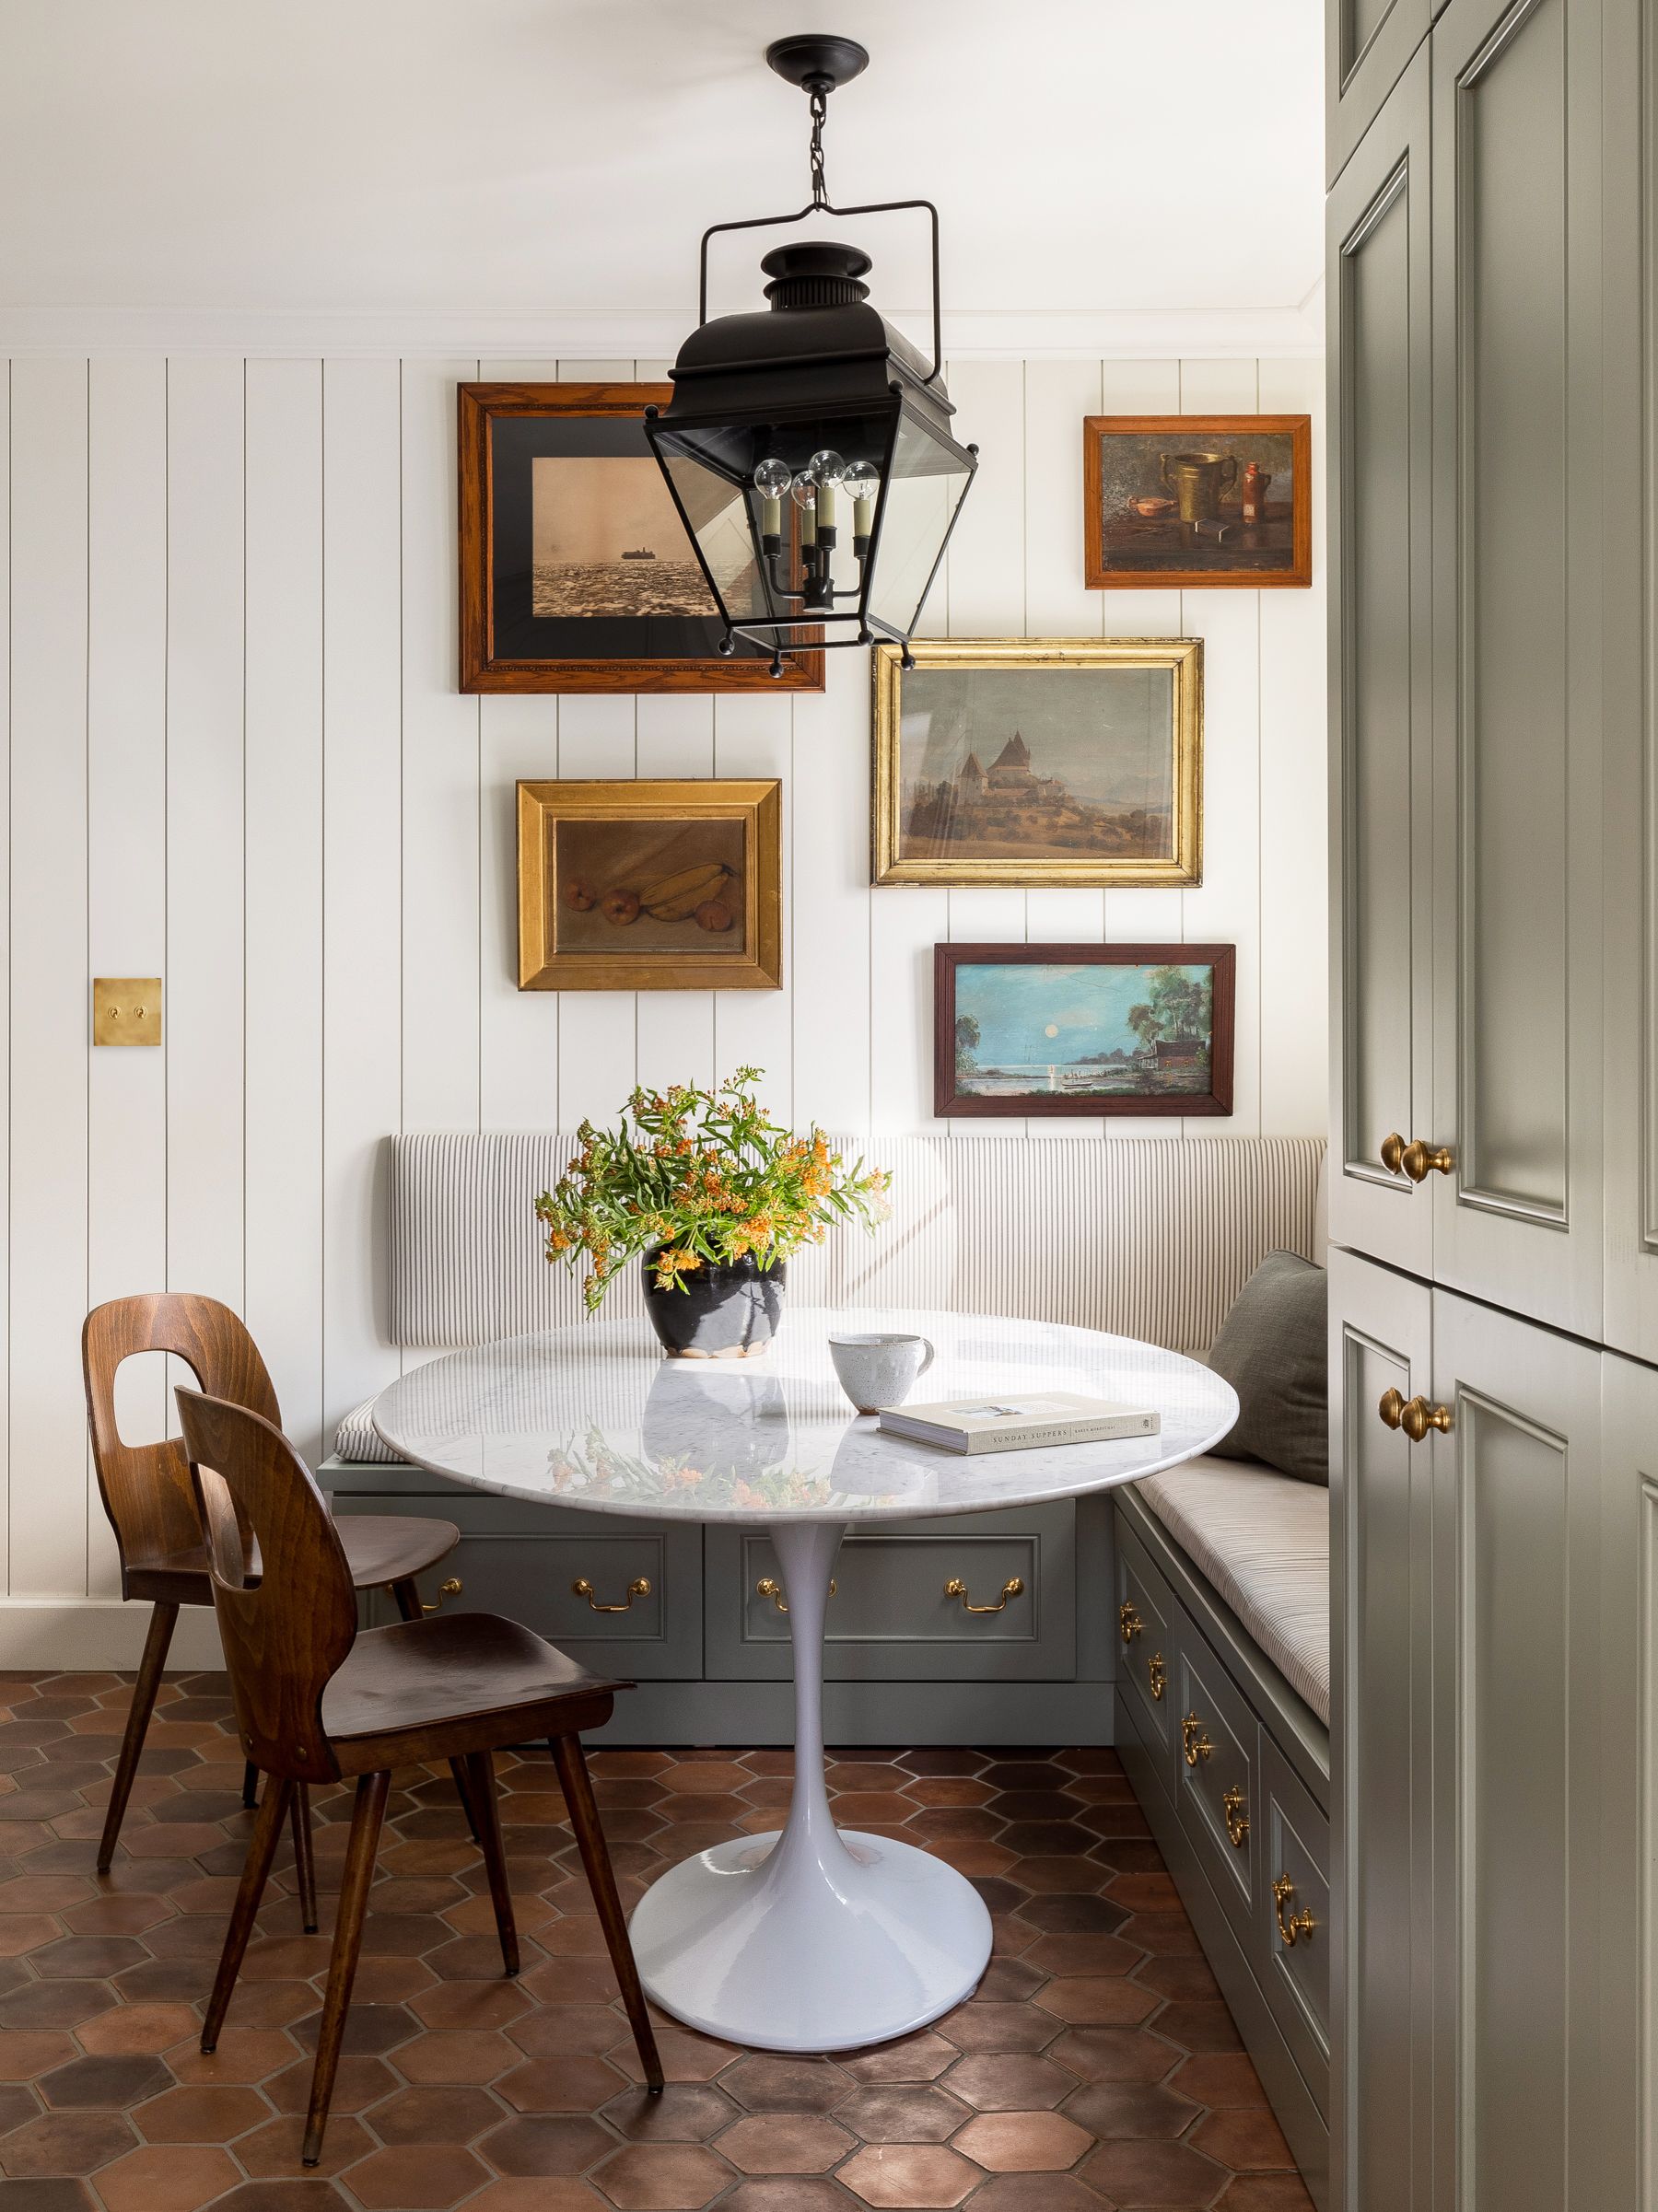 Dining Room Table Breakfast Nook Outlet, 20 OFF   www ...